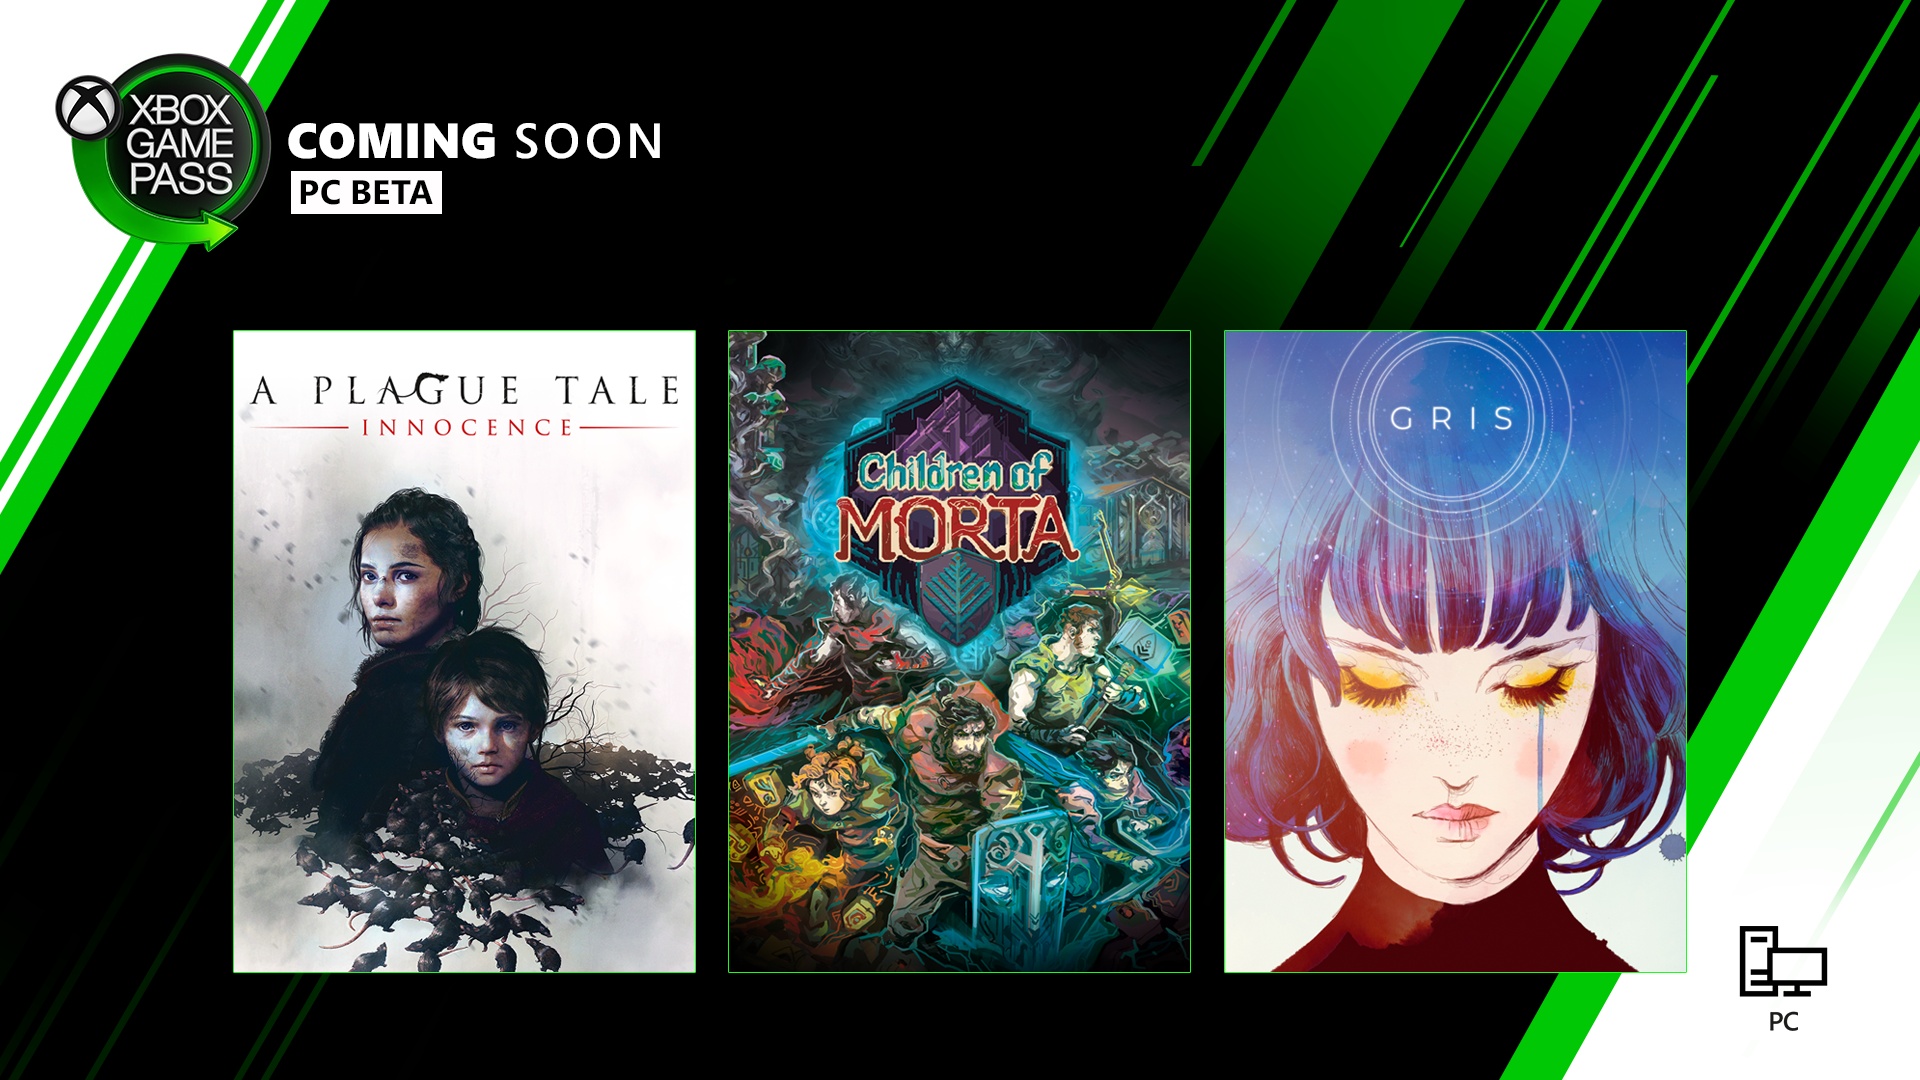 Xbox Game Pass for PC - Coming Soon